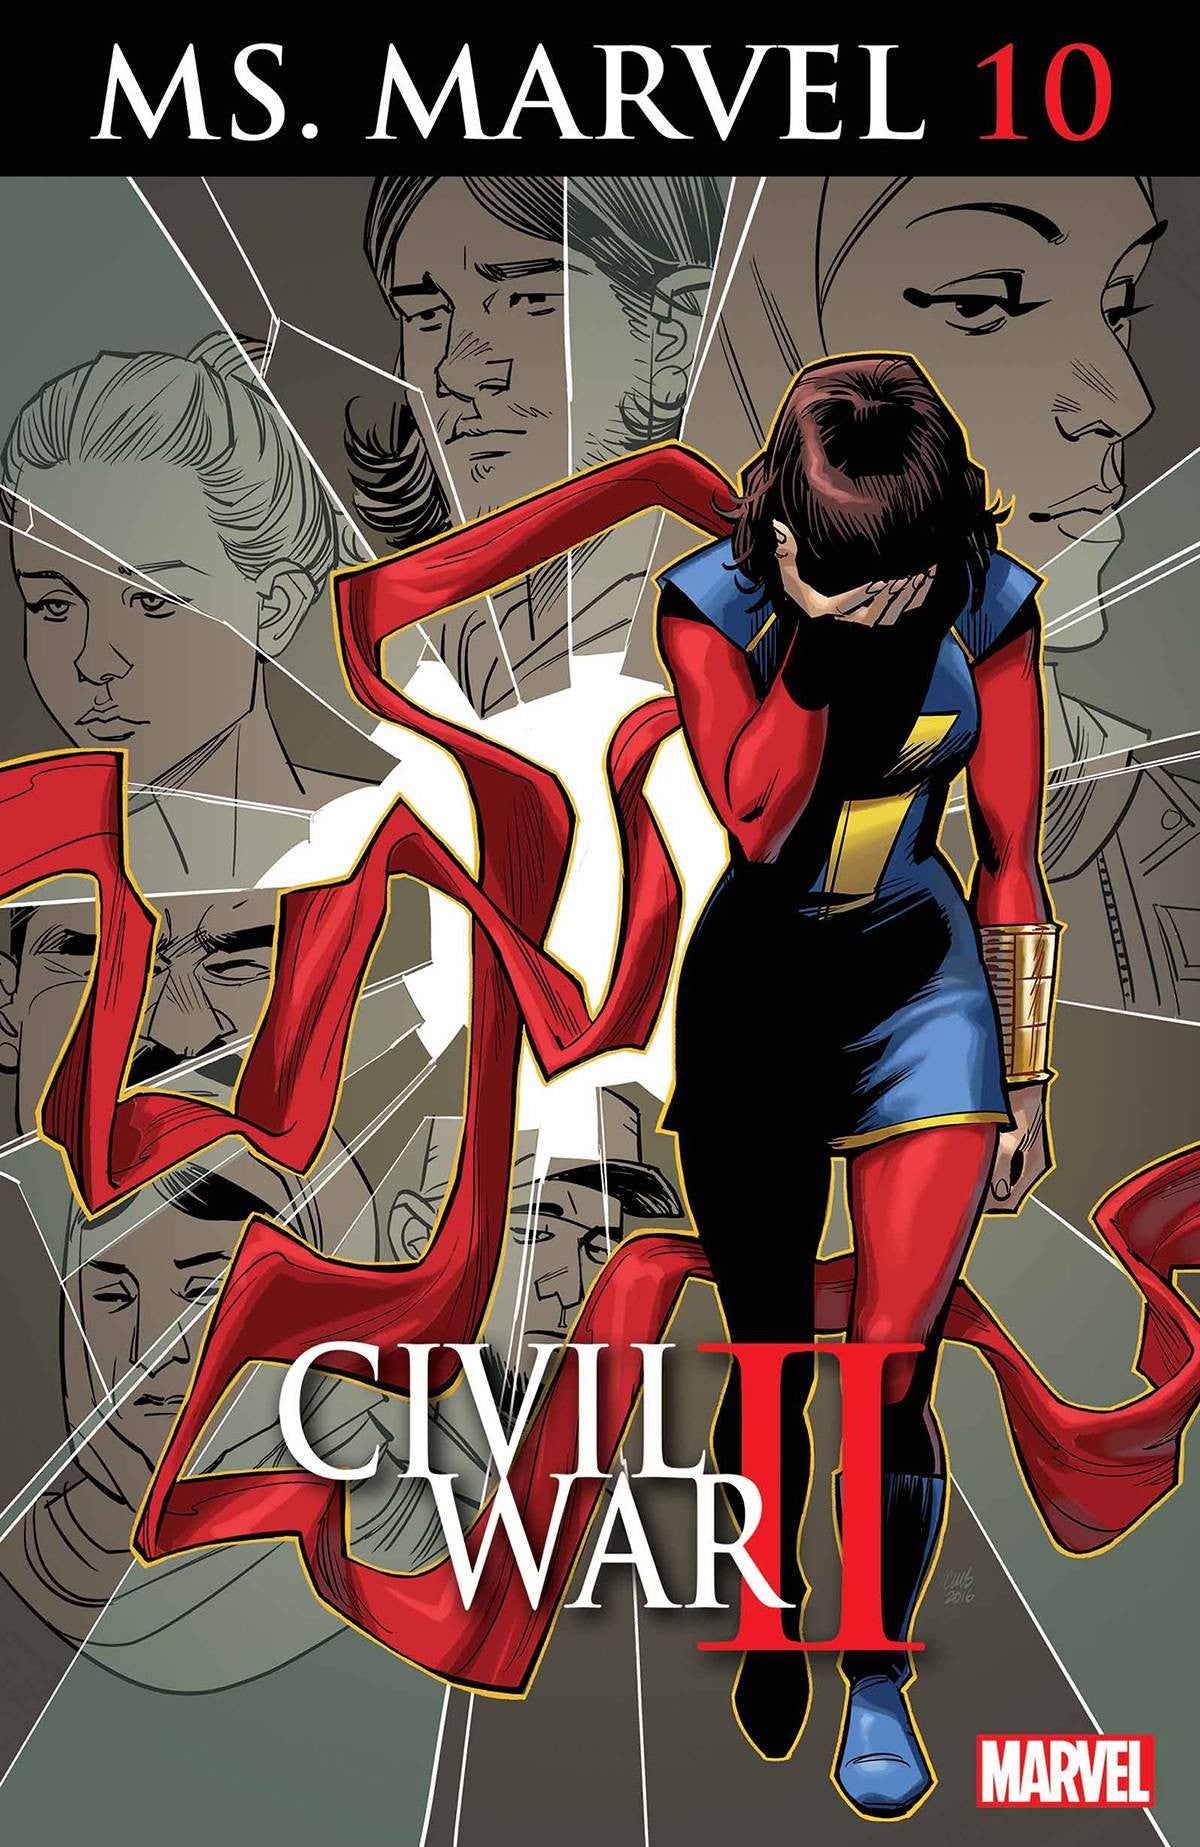 MS MARVEL #10 CW2 COVER